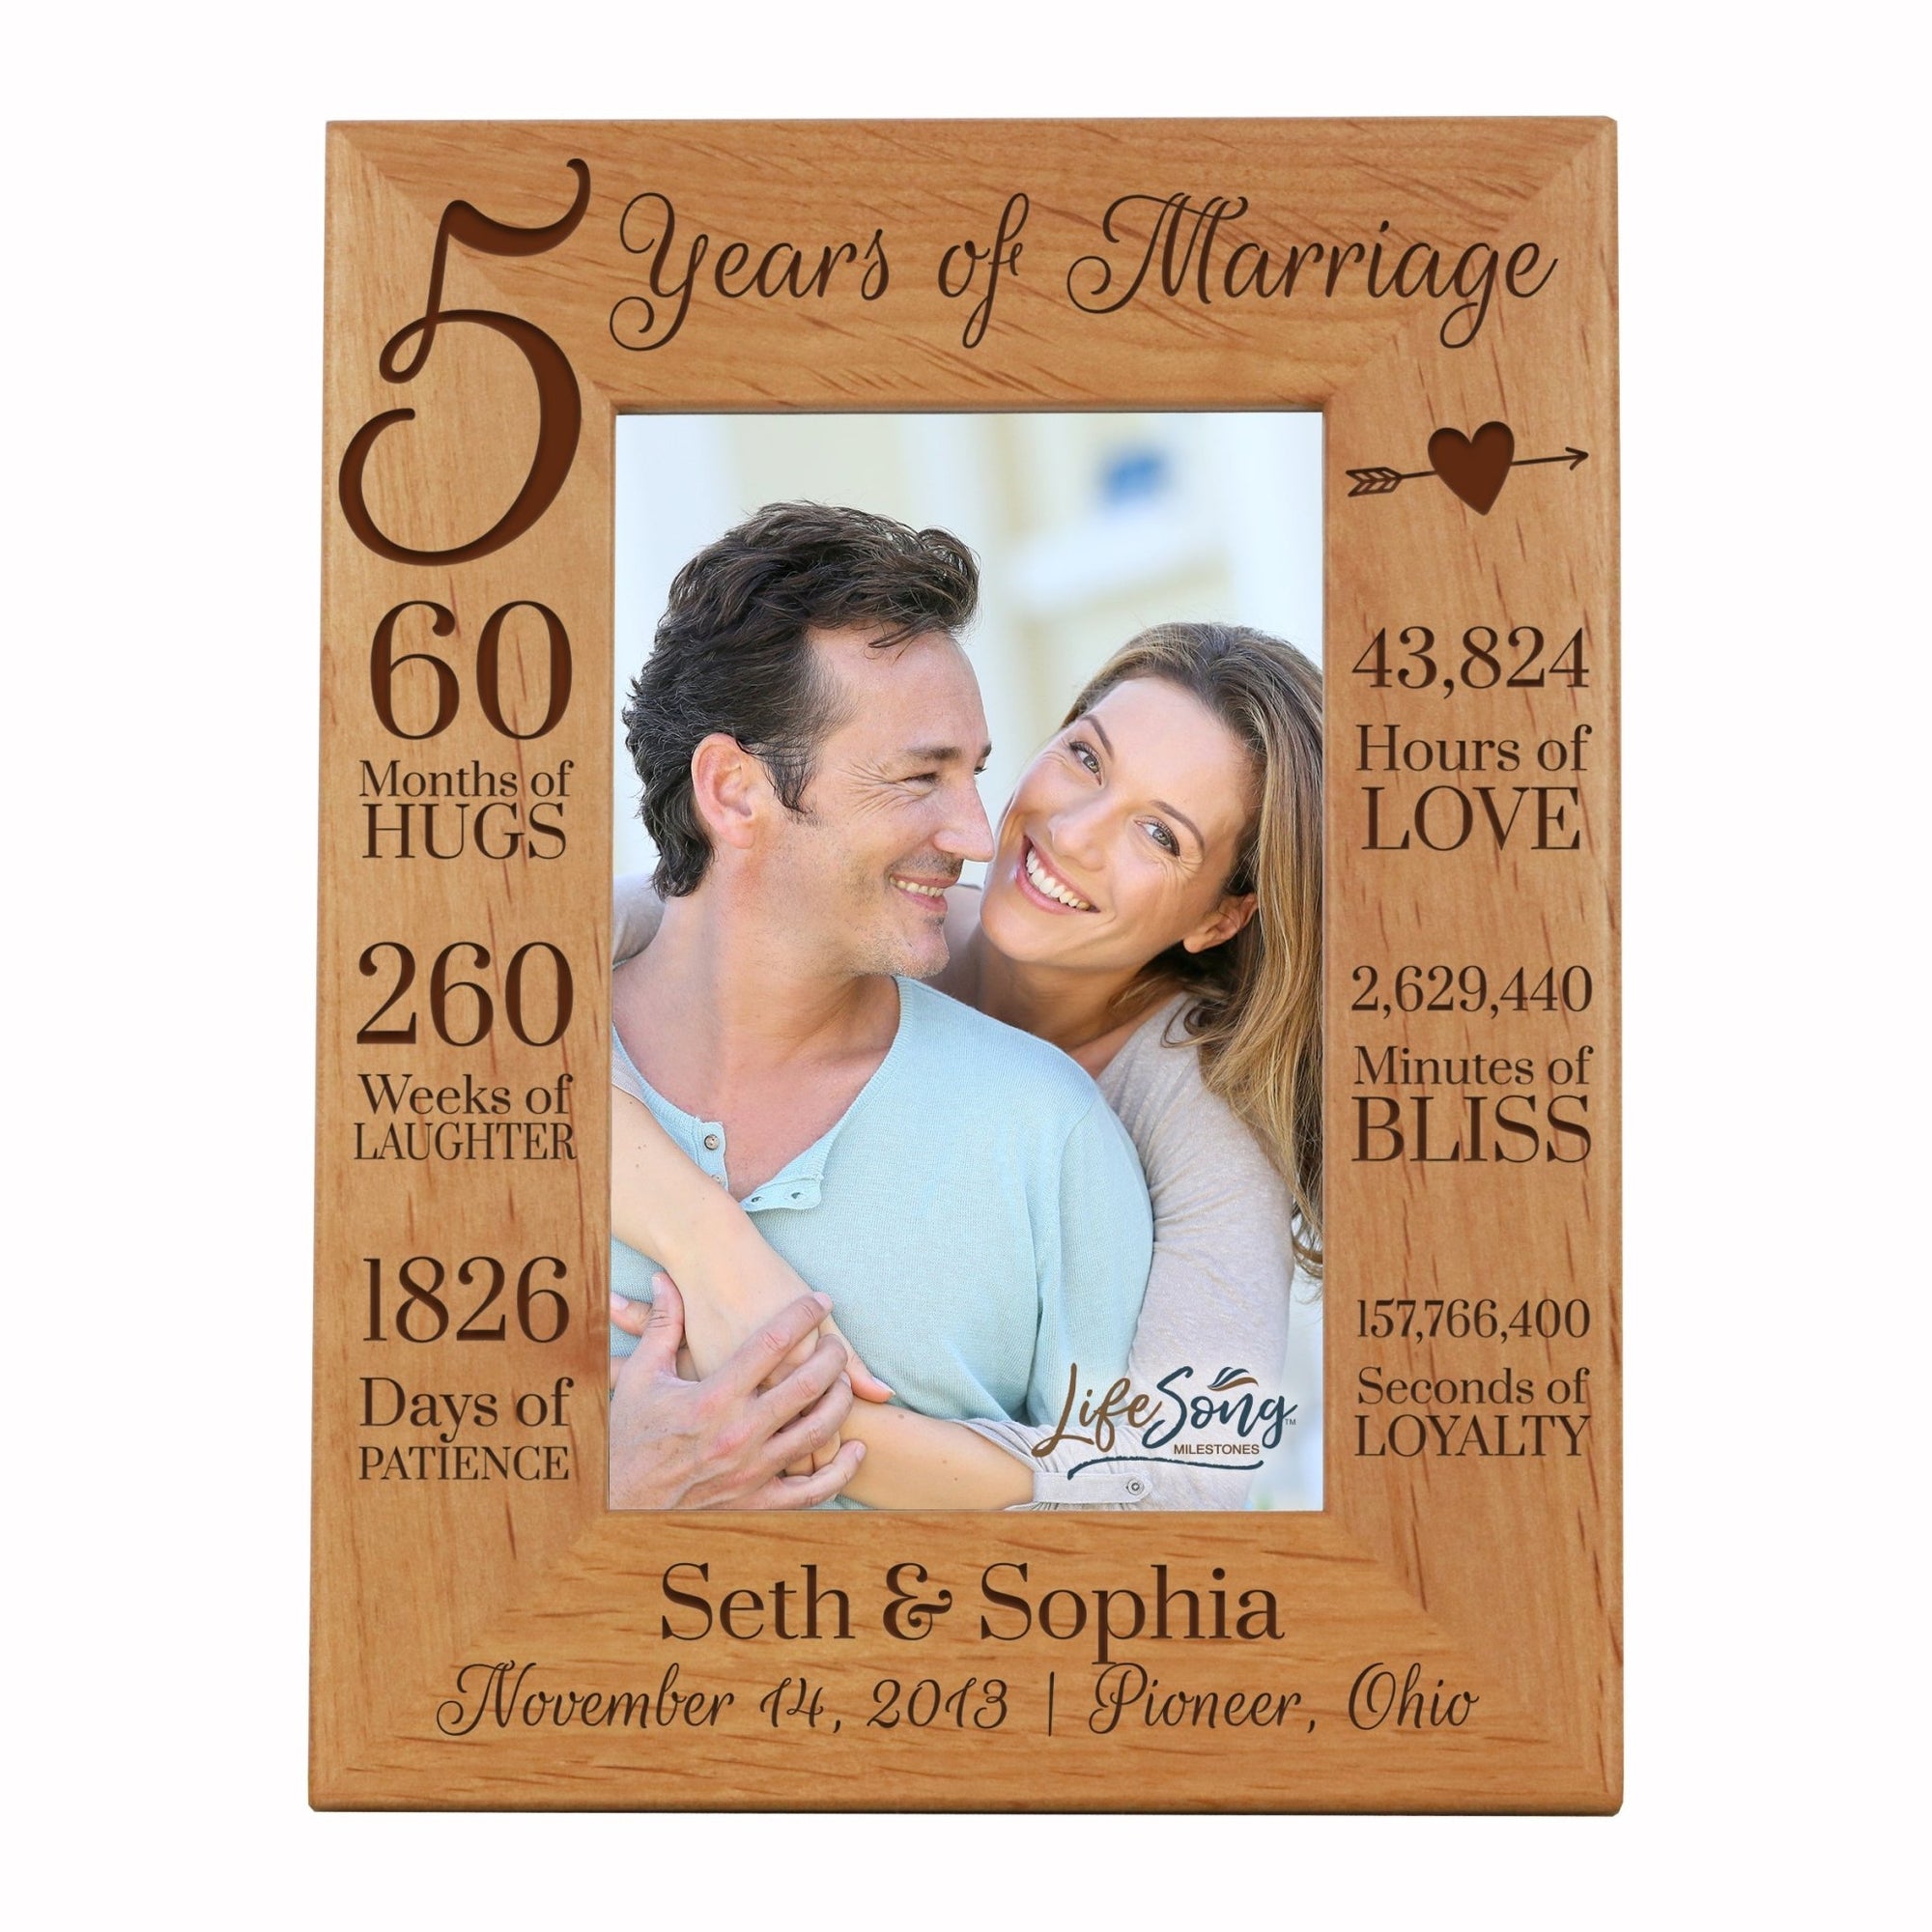 Lifesong Milestones Personalized Engraved 5th Anniversary Photo Frame Gift for Couples